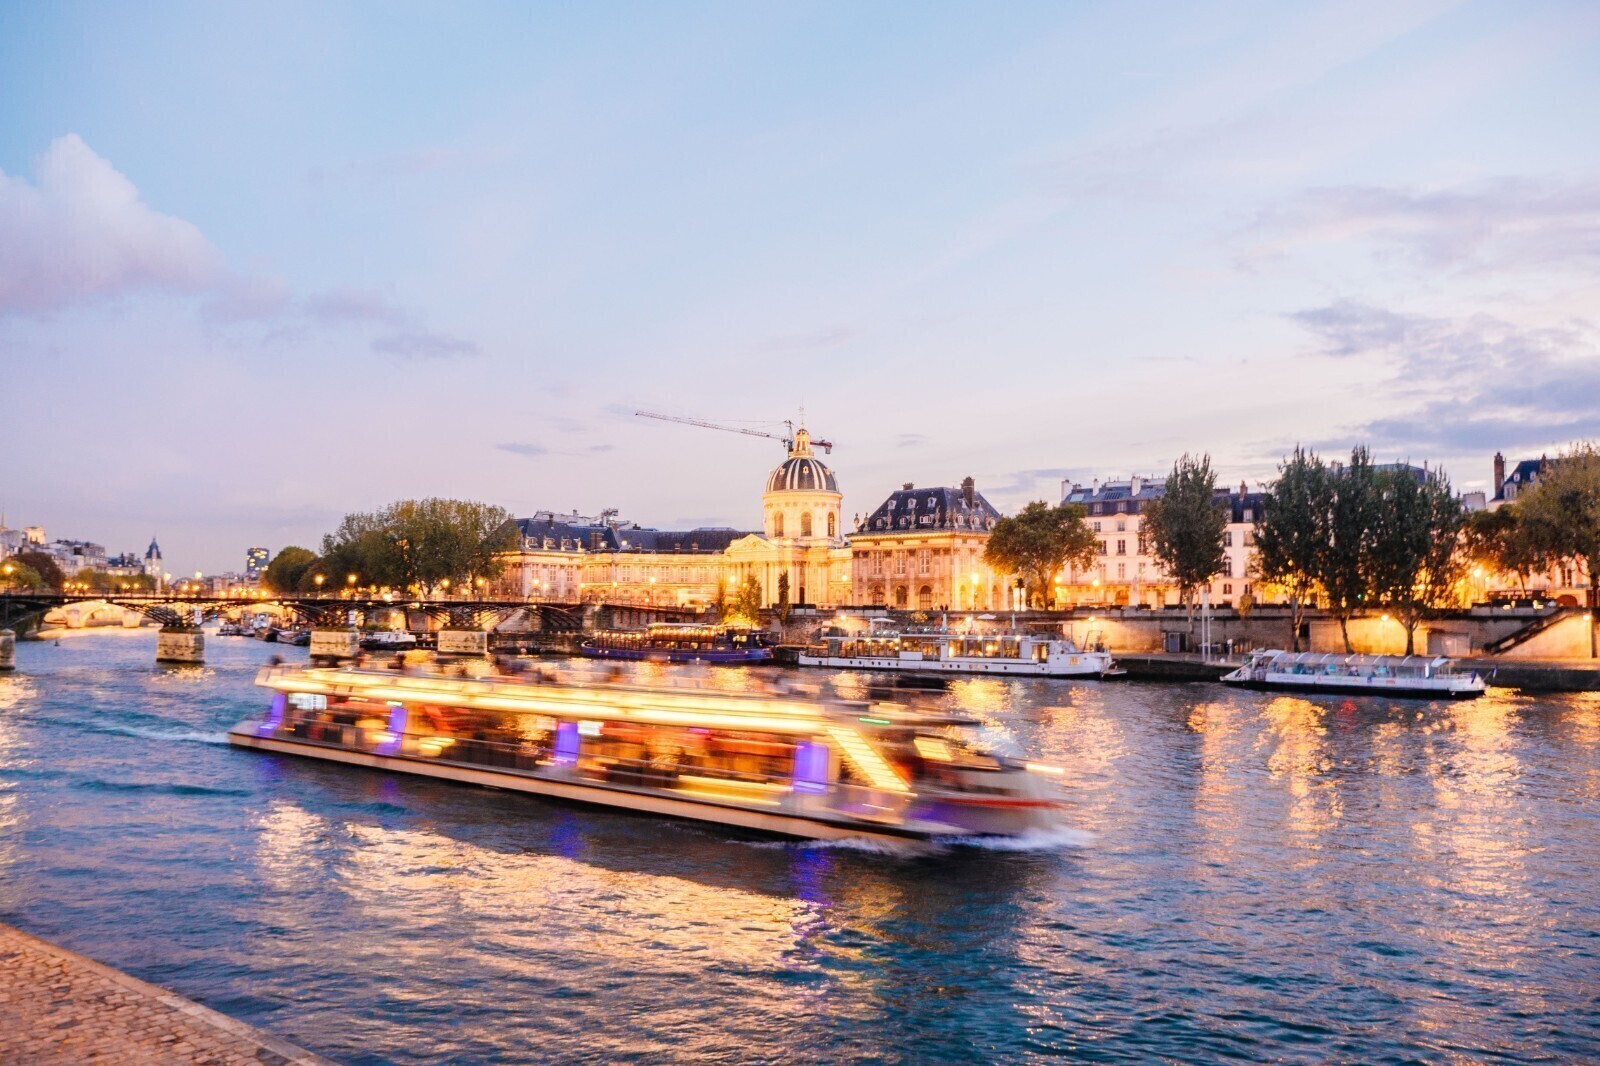 River Cruise on the Seine